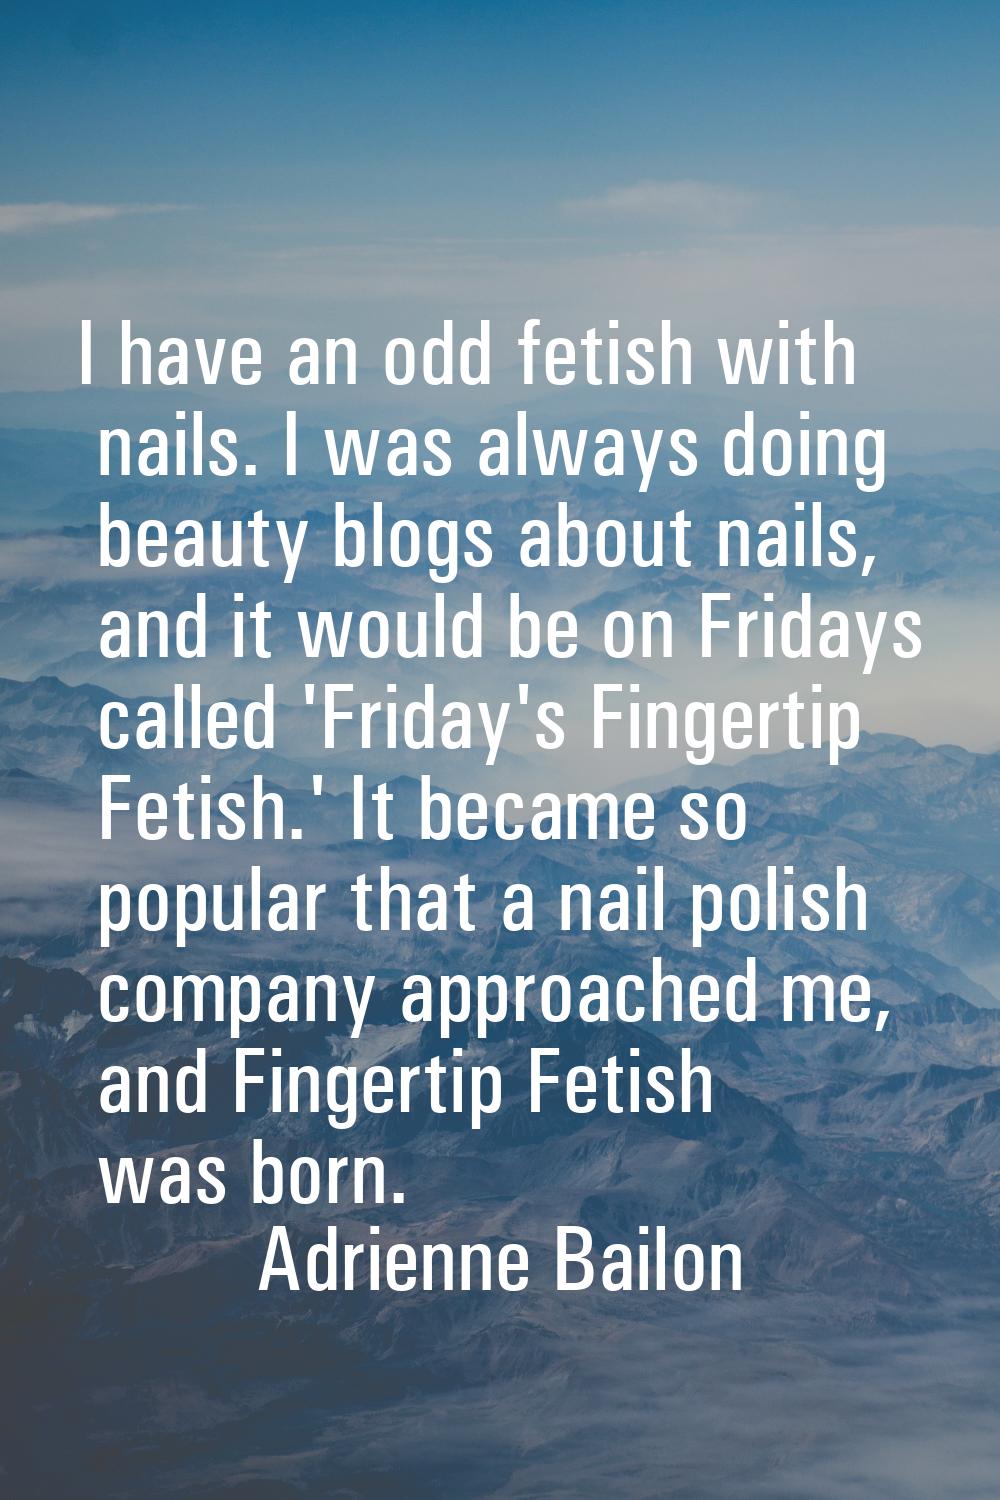 I have an odd fetish with nails. I was always doing beauty blogs about nails, and it would be on Fr